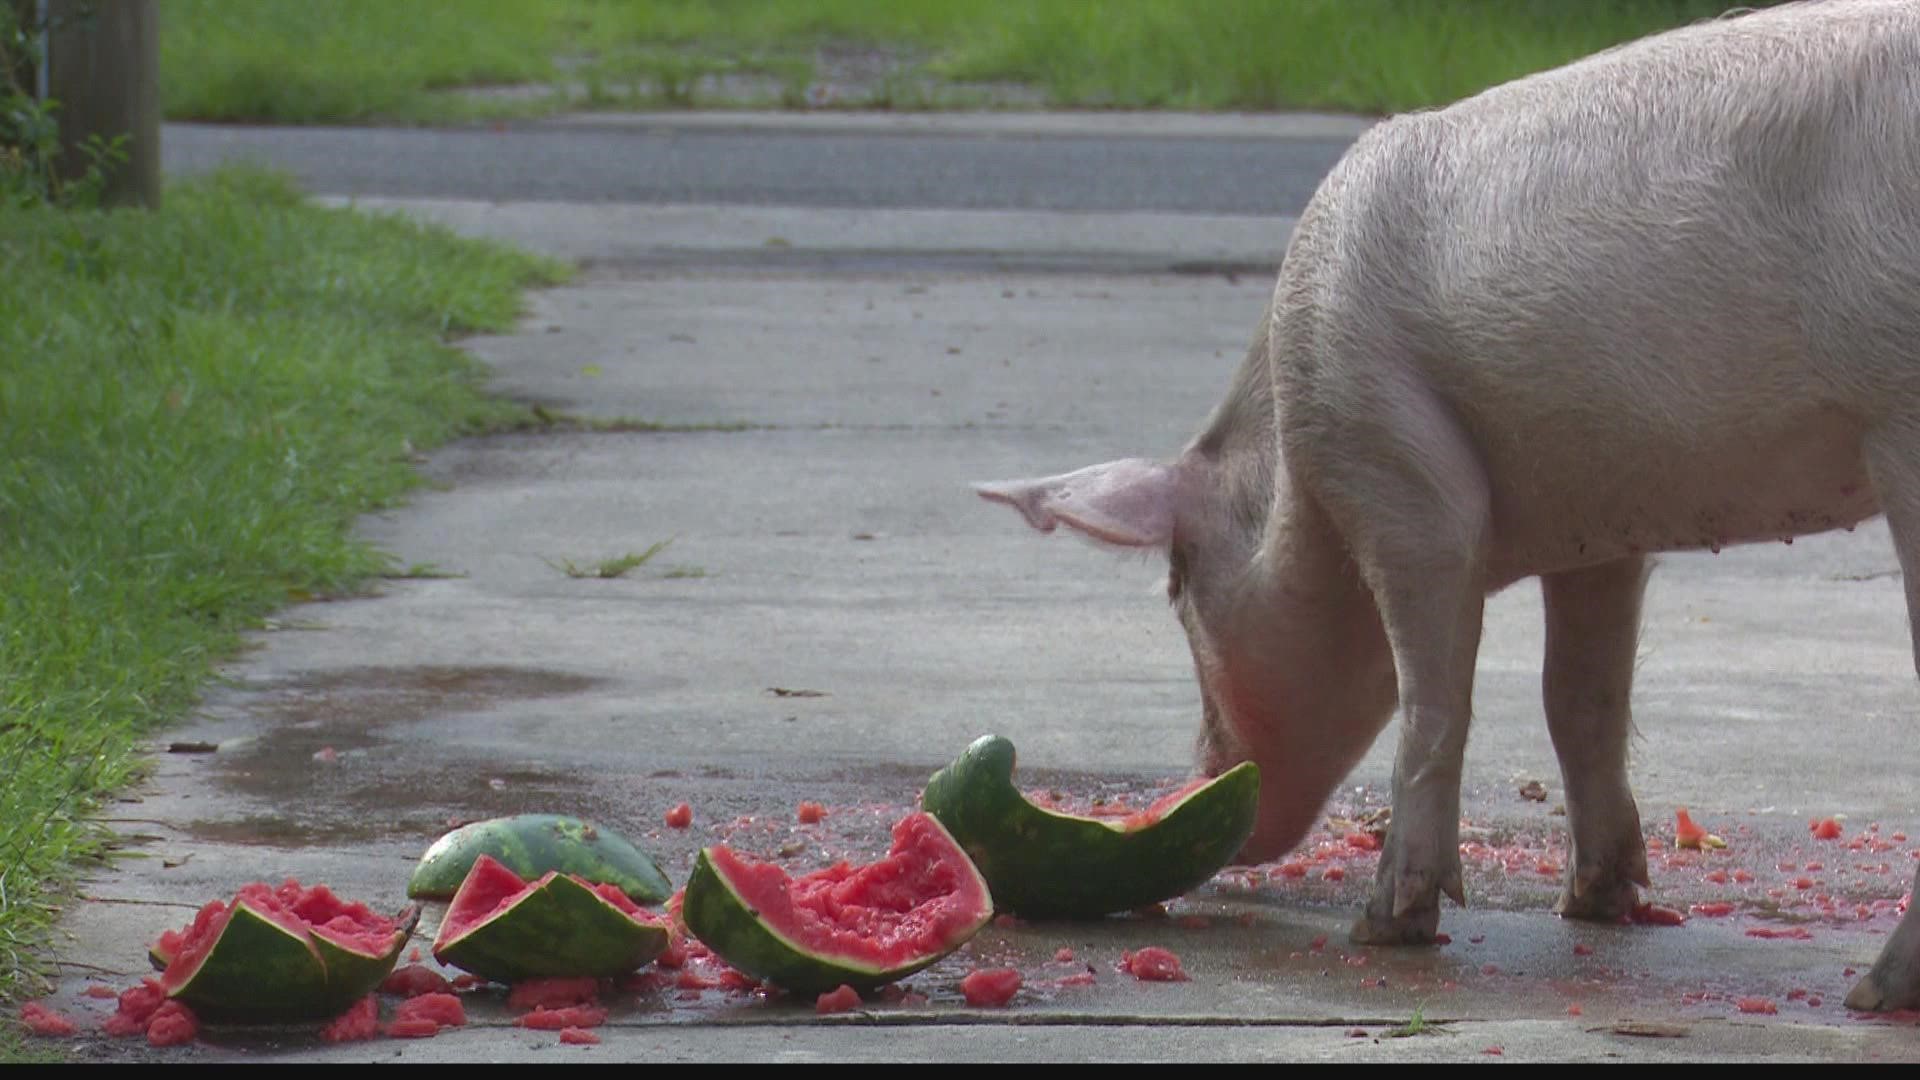 One resident says one of the pigs was attacked by a dog at one point during the day.